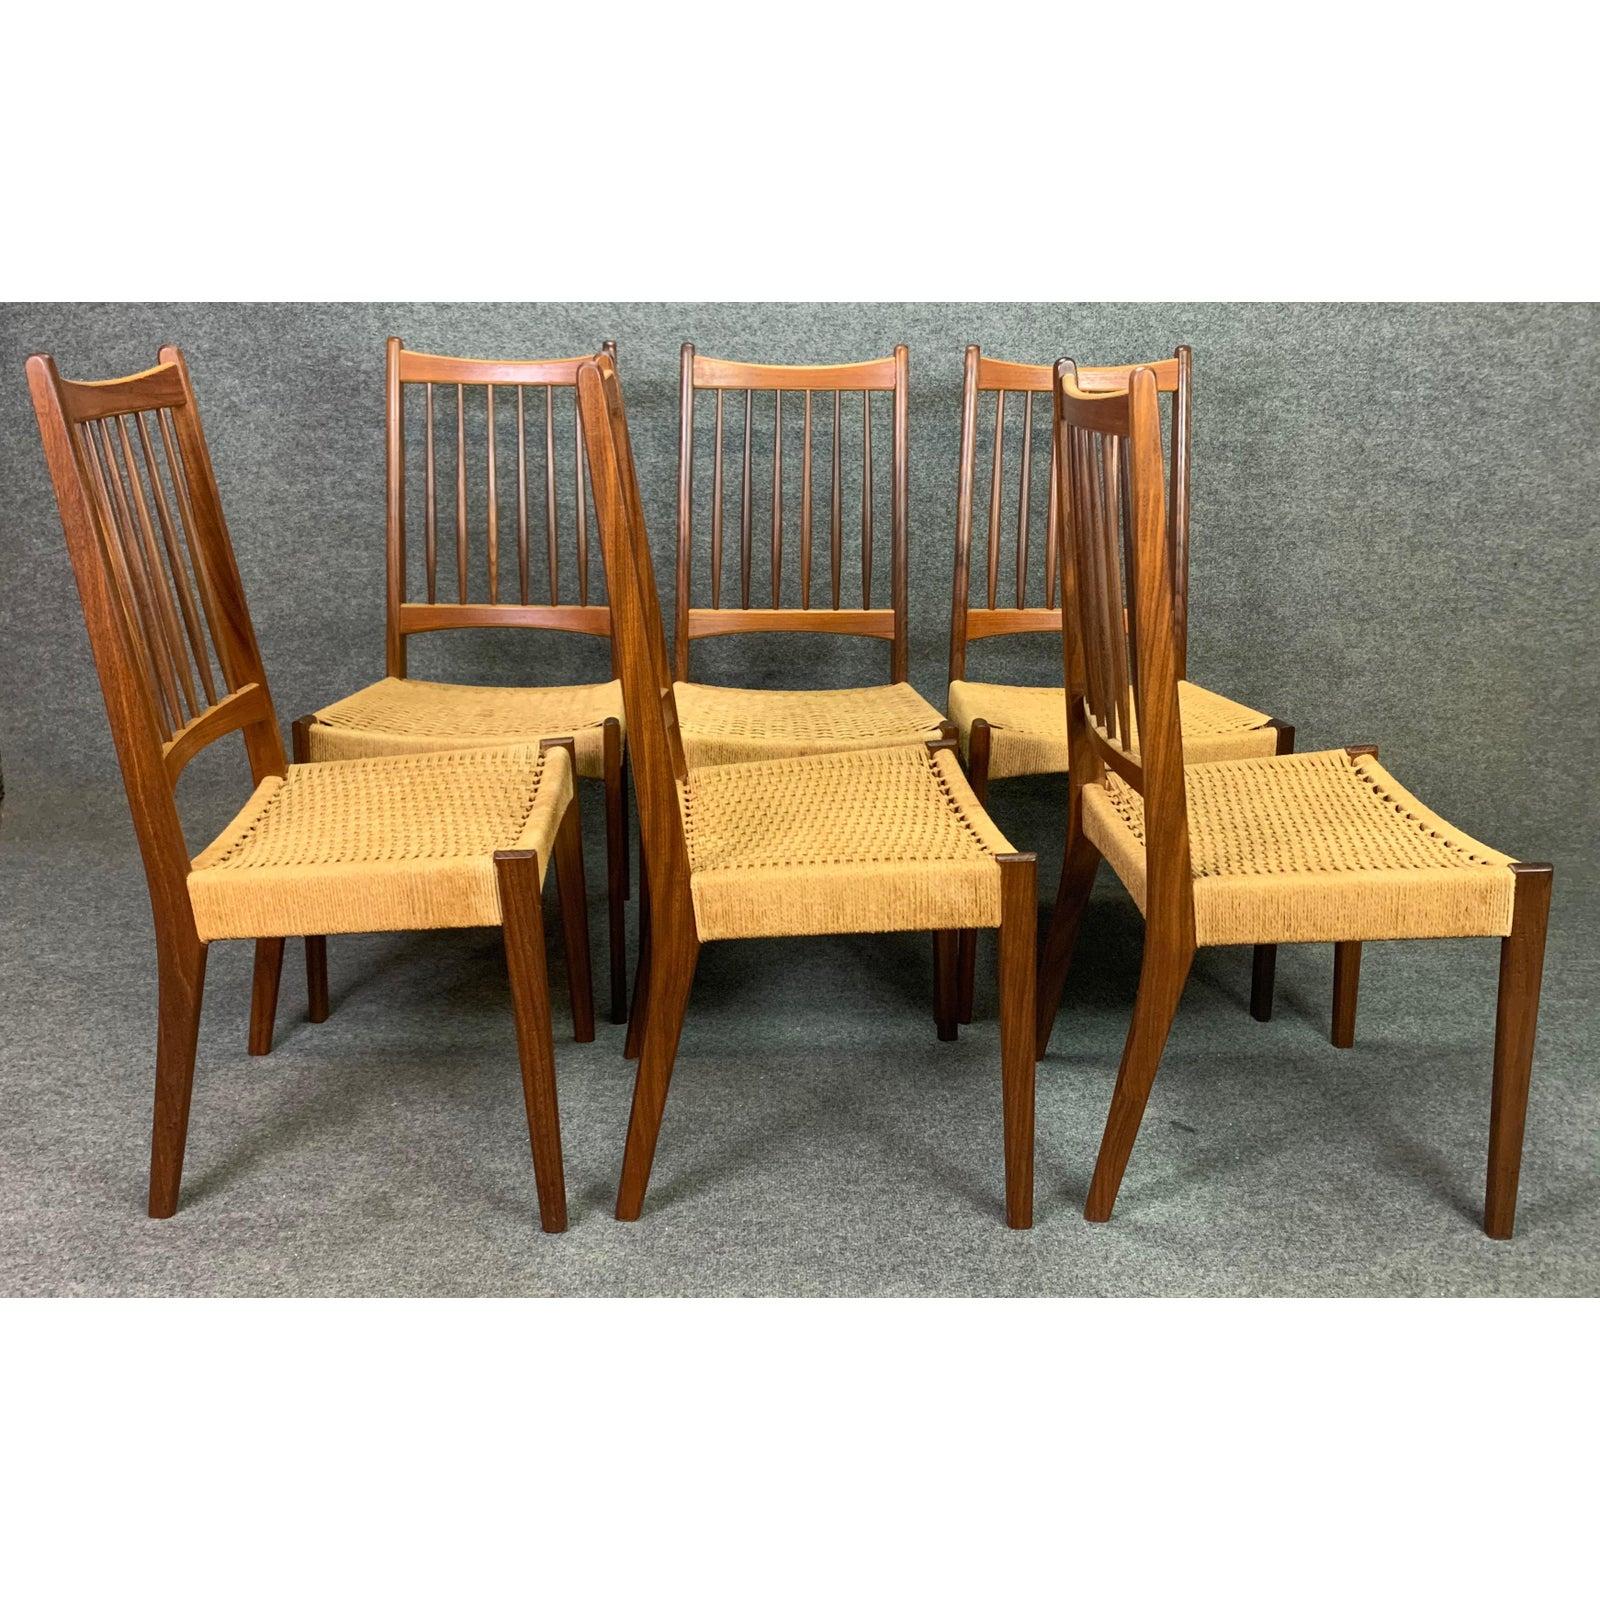 Vintage Danish Mid-Century Modern Teak High Back Dining Chairs, Set of Six For Sale 3